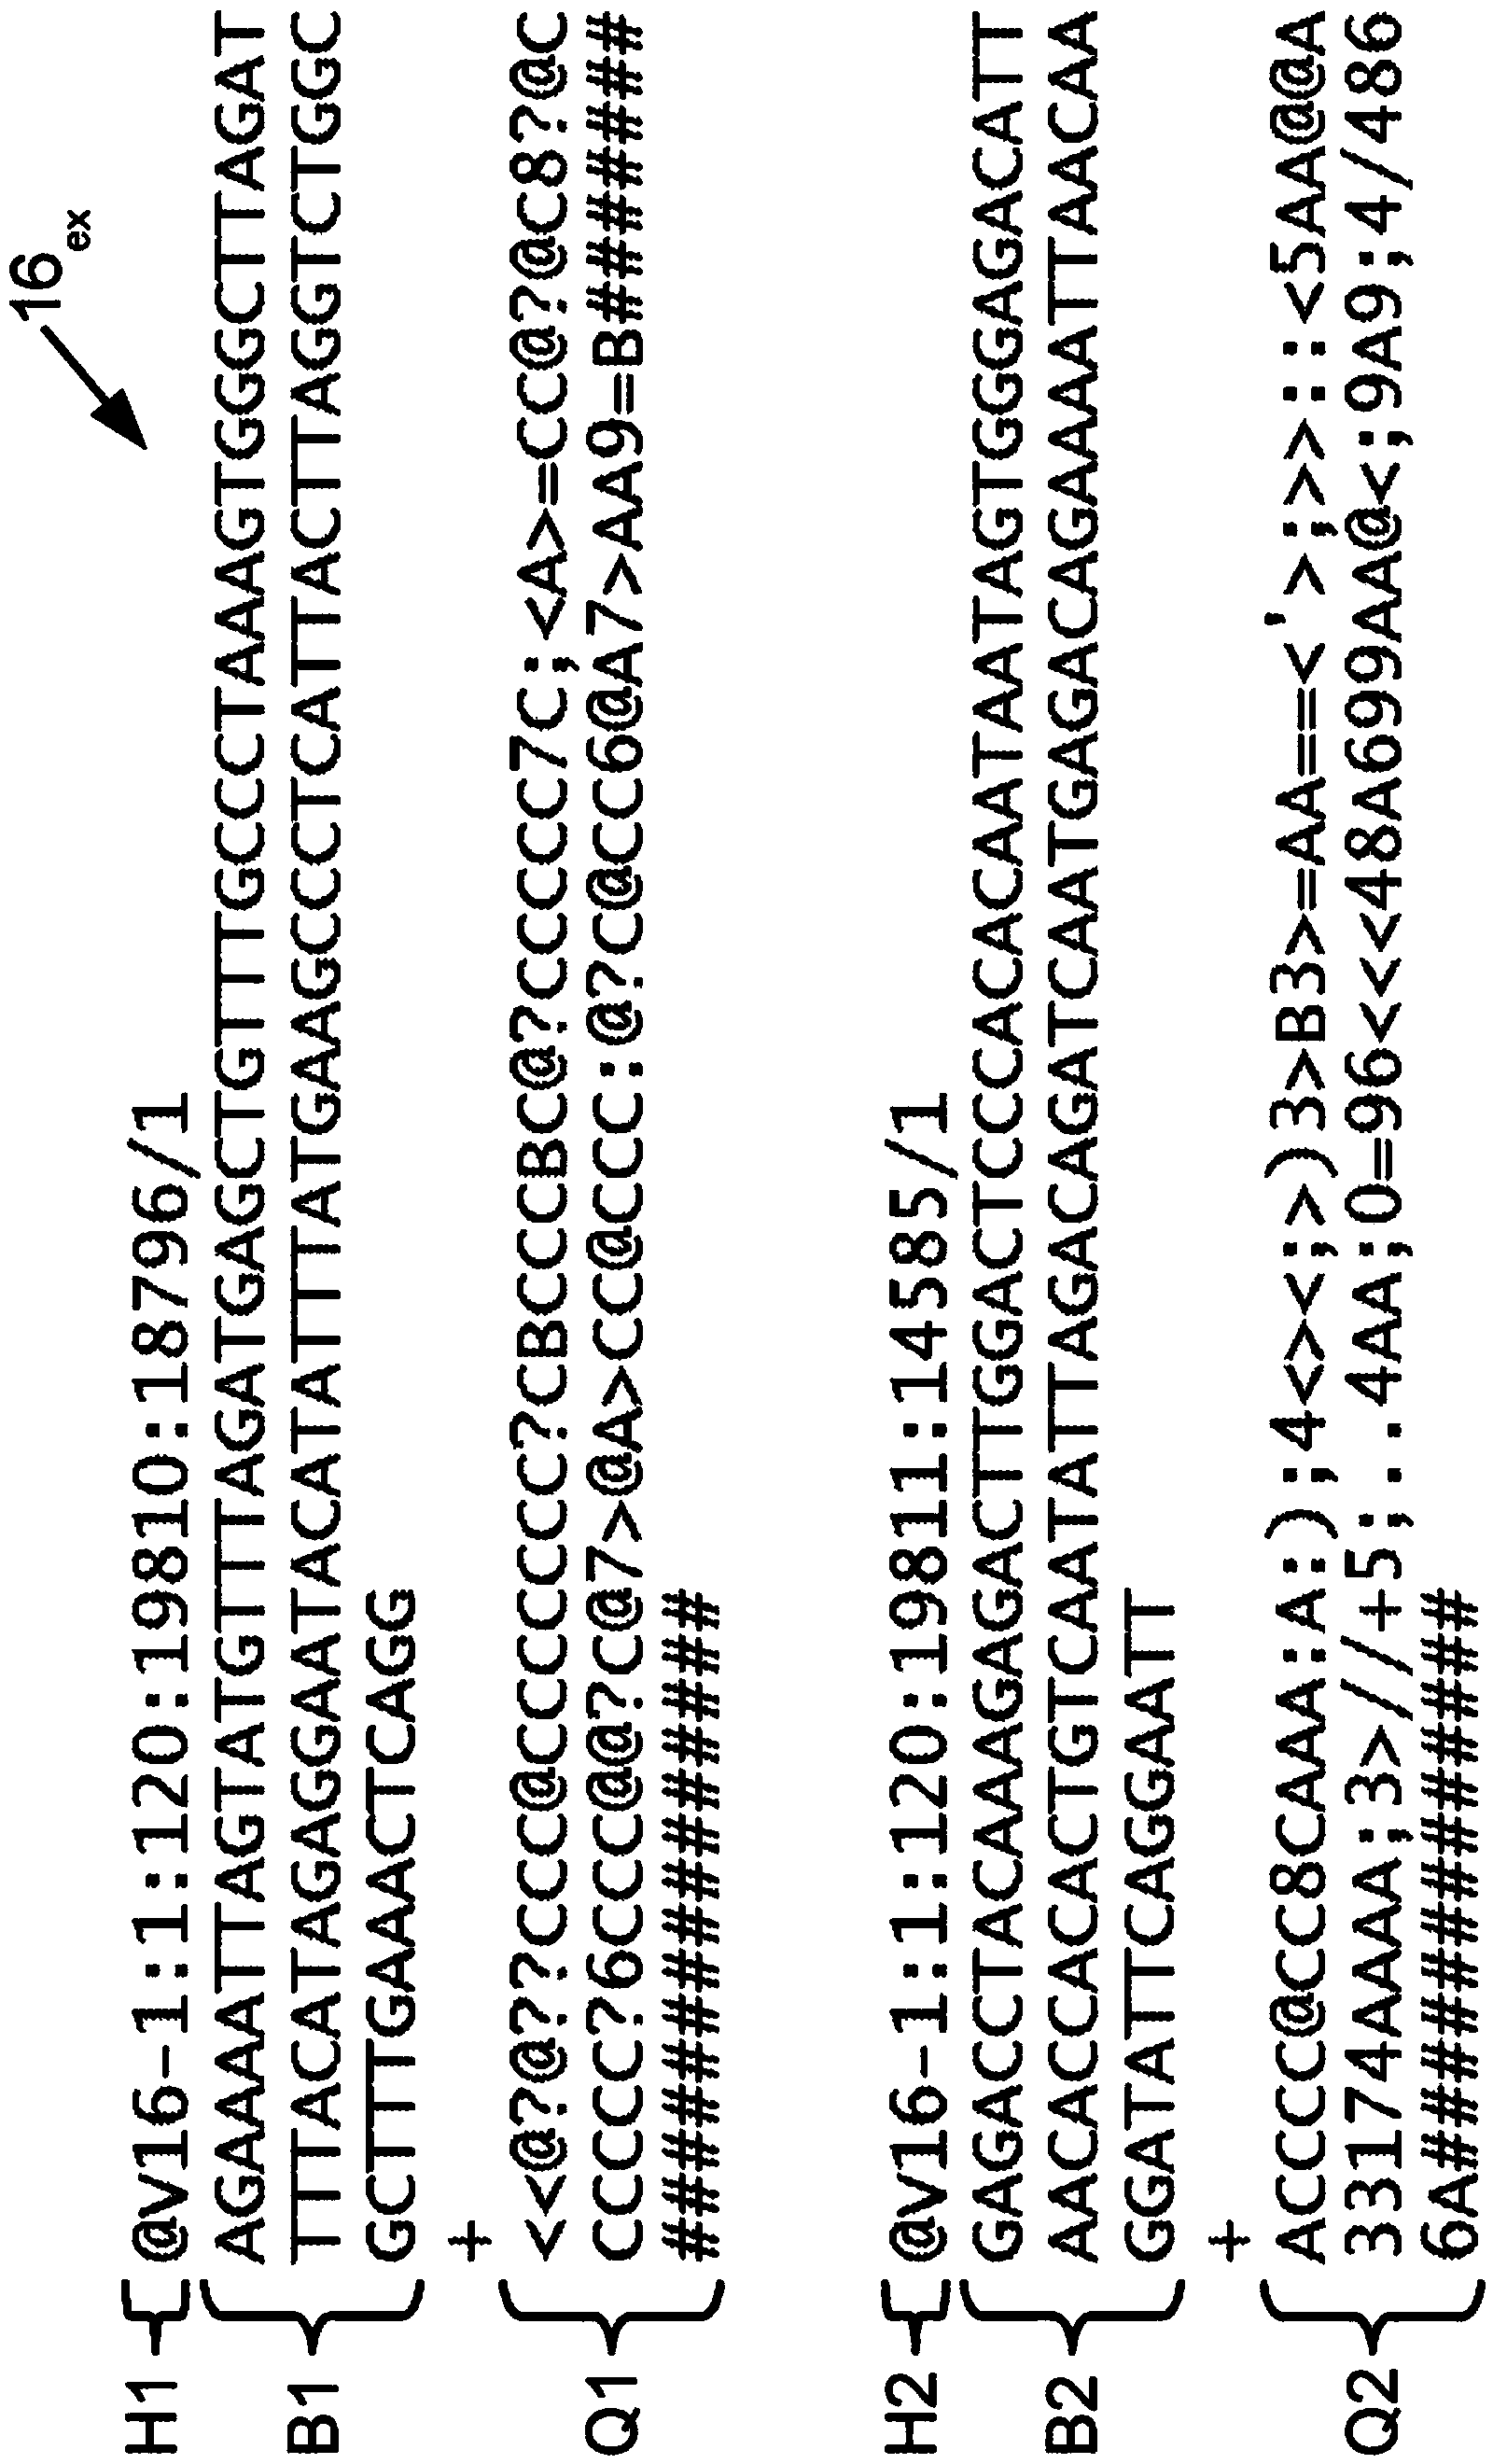 Compact next generation sequencing database and efficient sequence processing using same